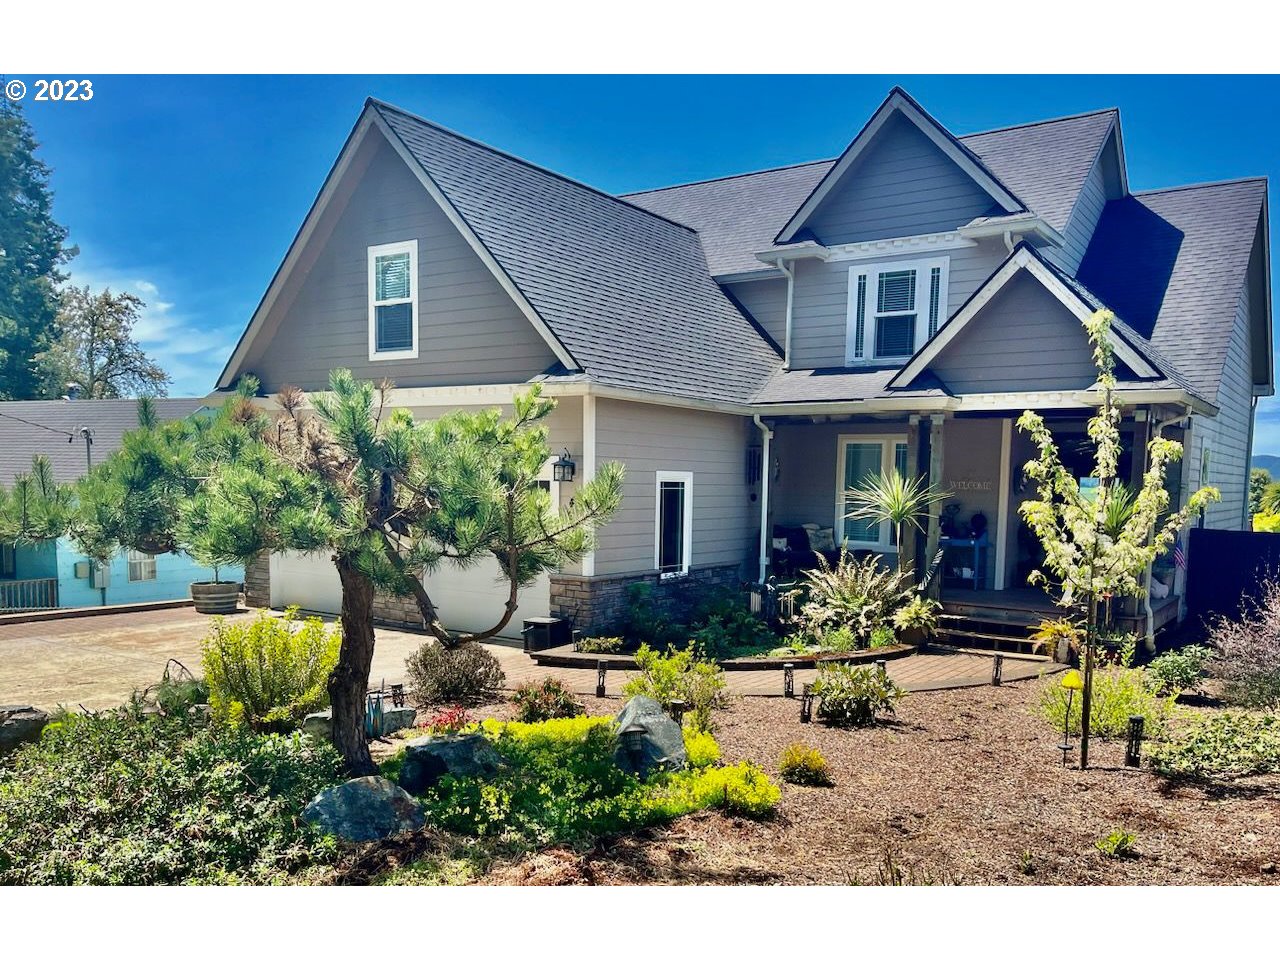 495 S HENRY ST, Coquille, OR 